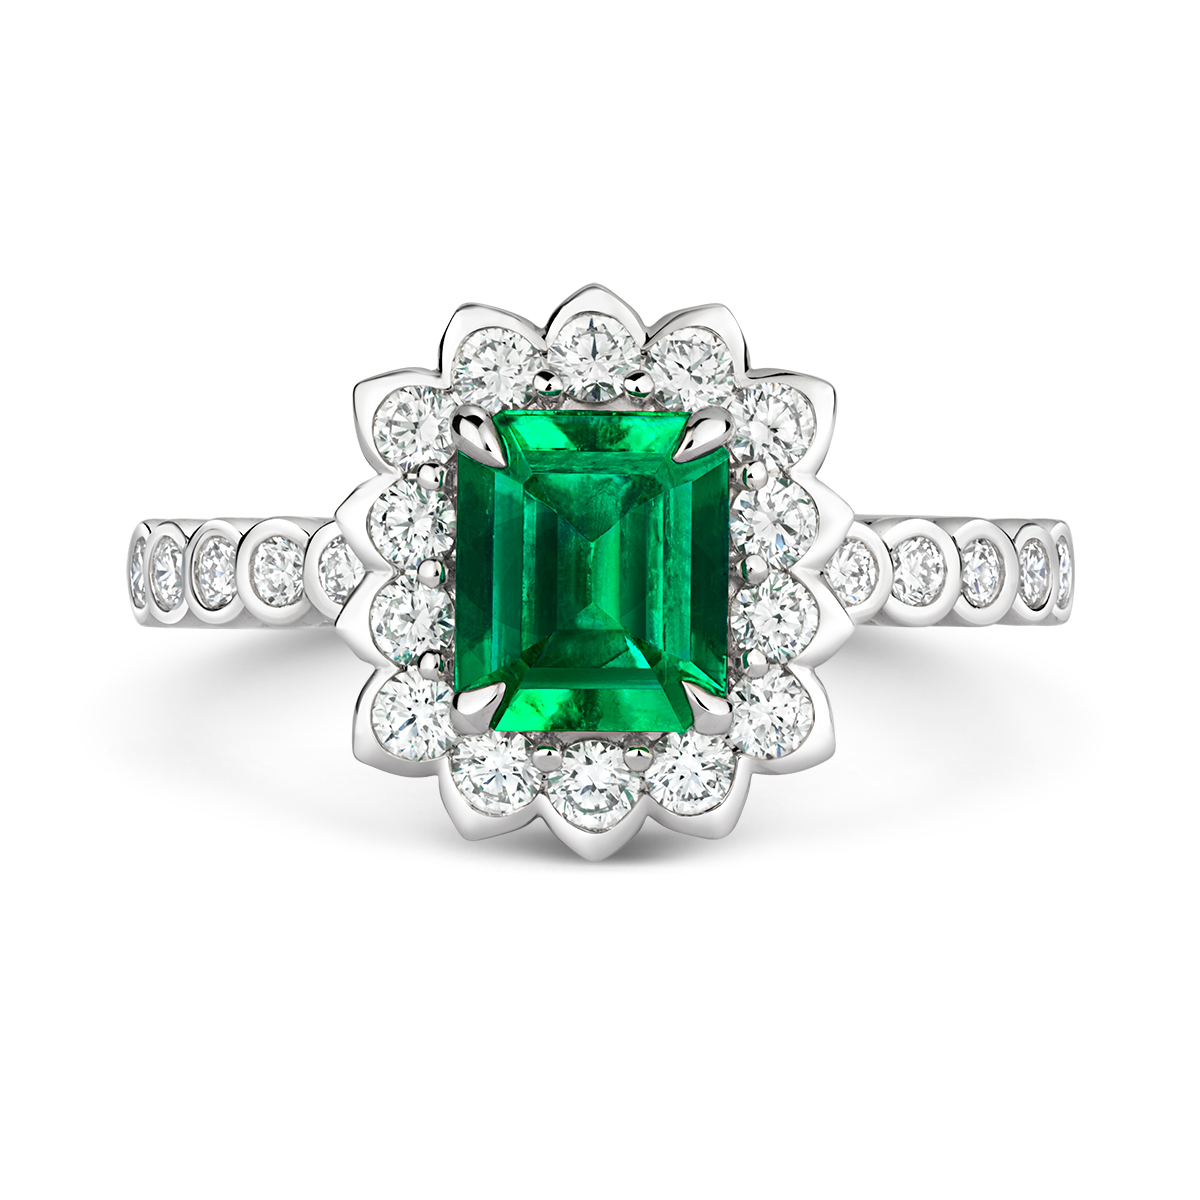 Unsure on this diamond & emerald family heirloom ring